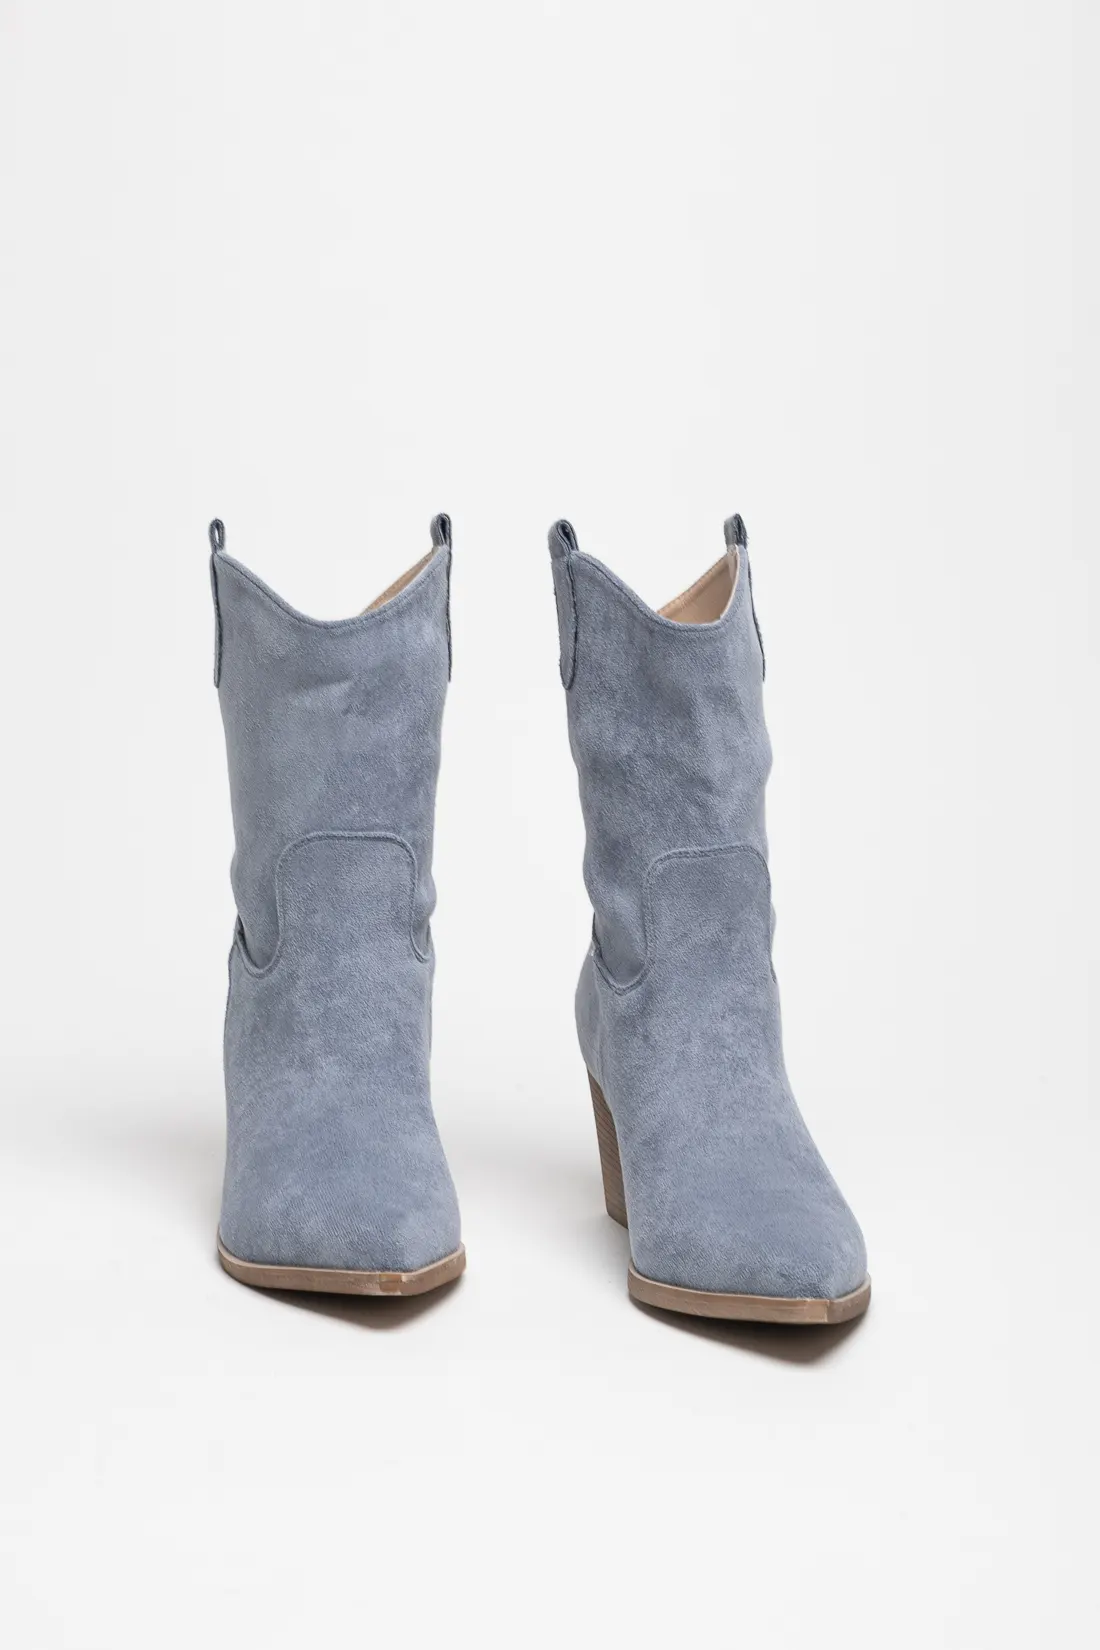 BOTTE BASSE CORCELY COUNTRY - BLEU